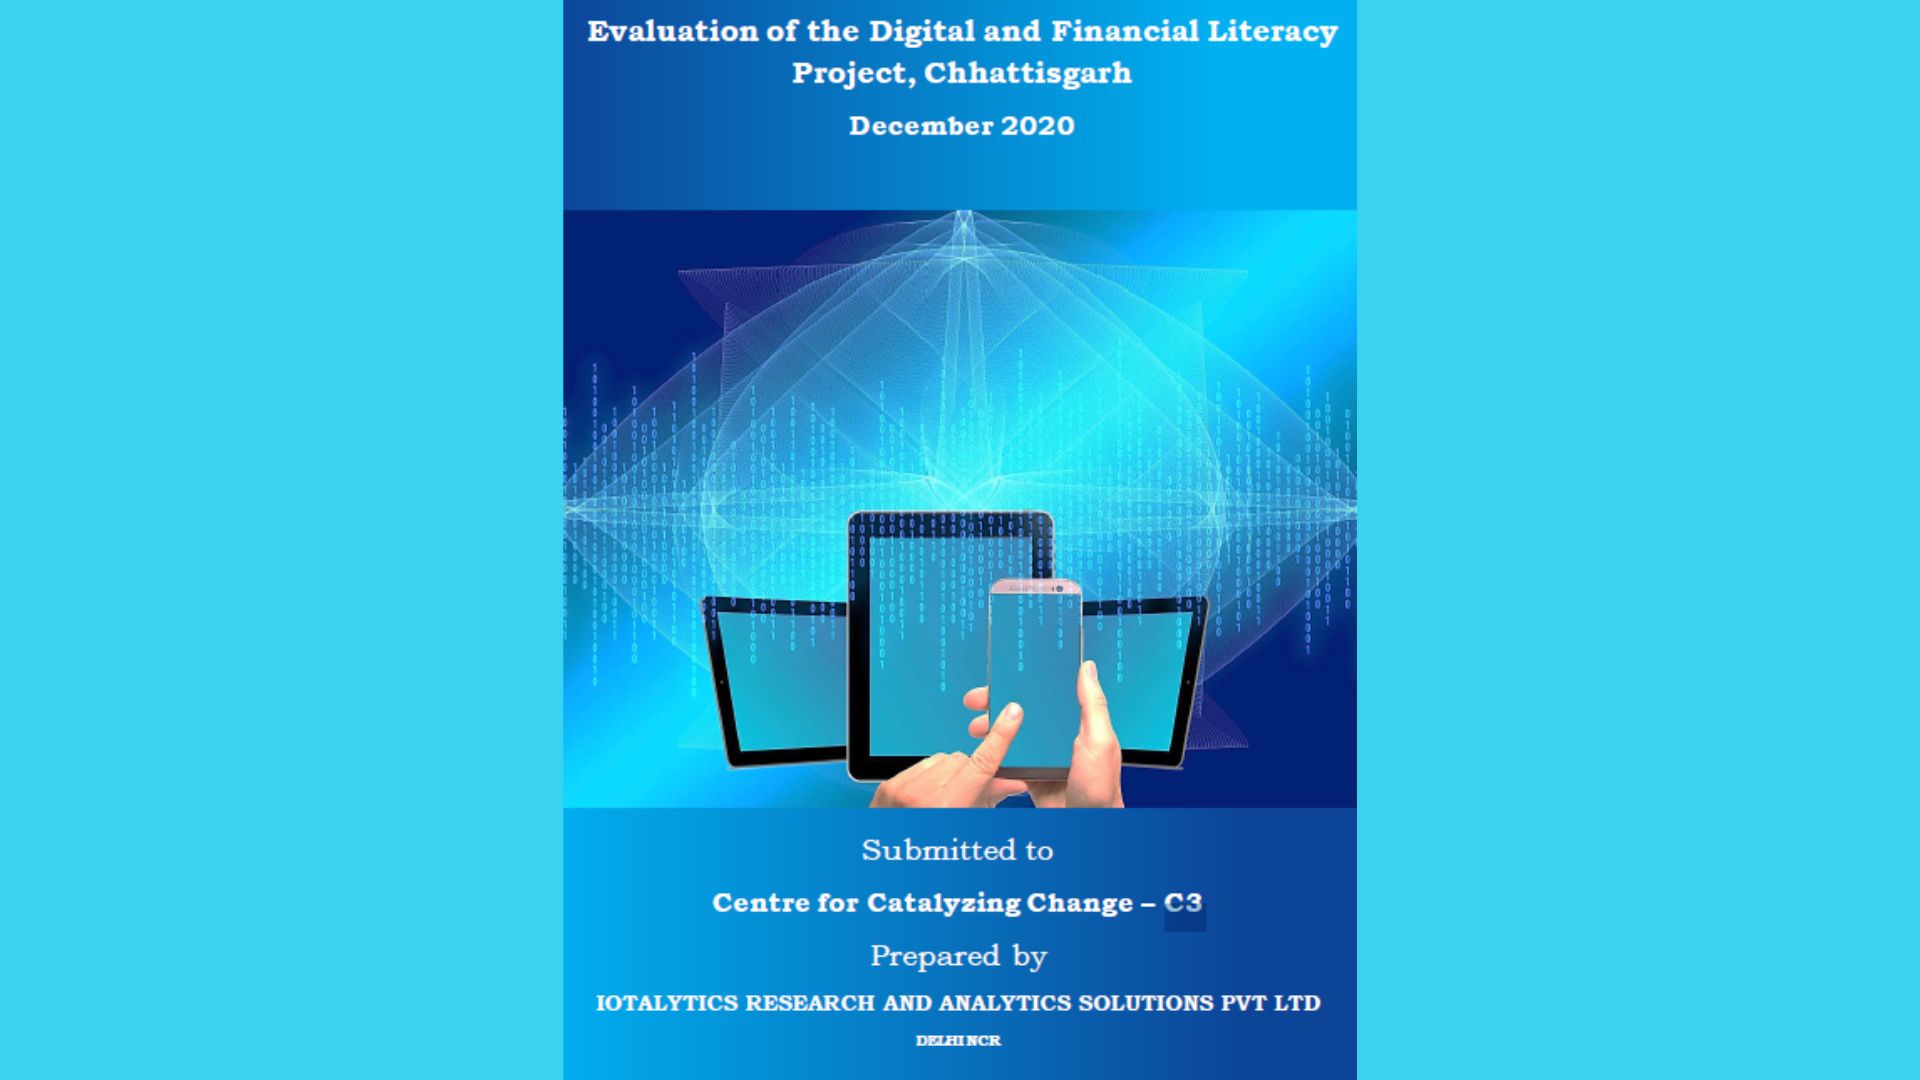 Evaluation of the Digital and Financial Literacy Project, Chhattisgarh